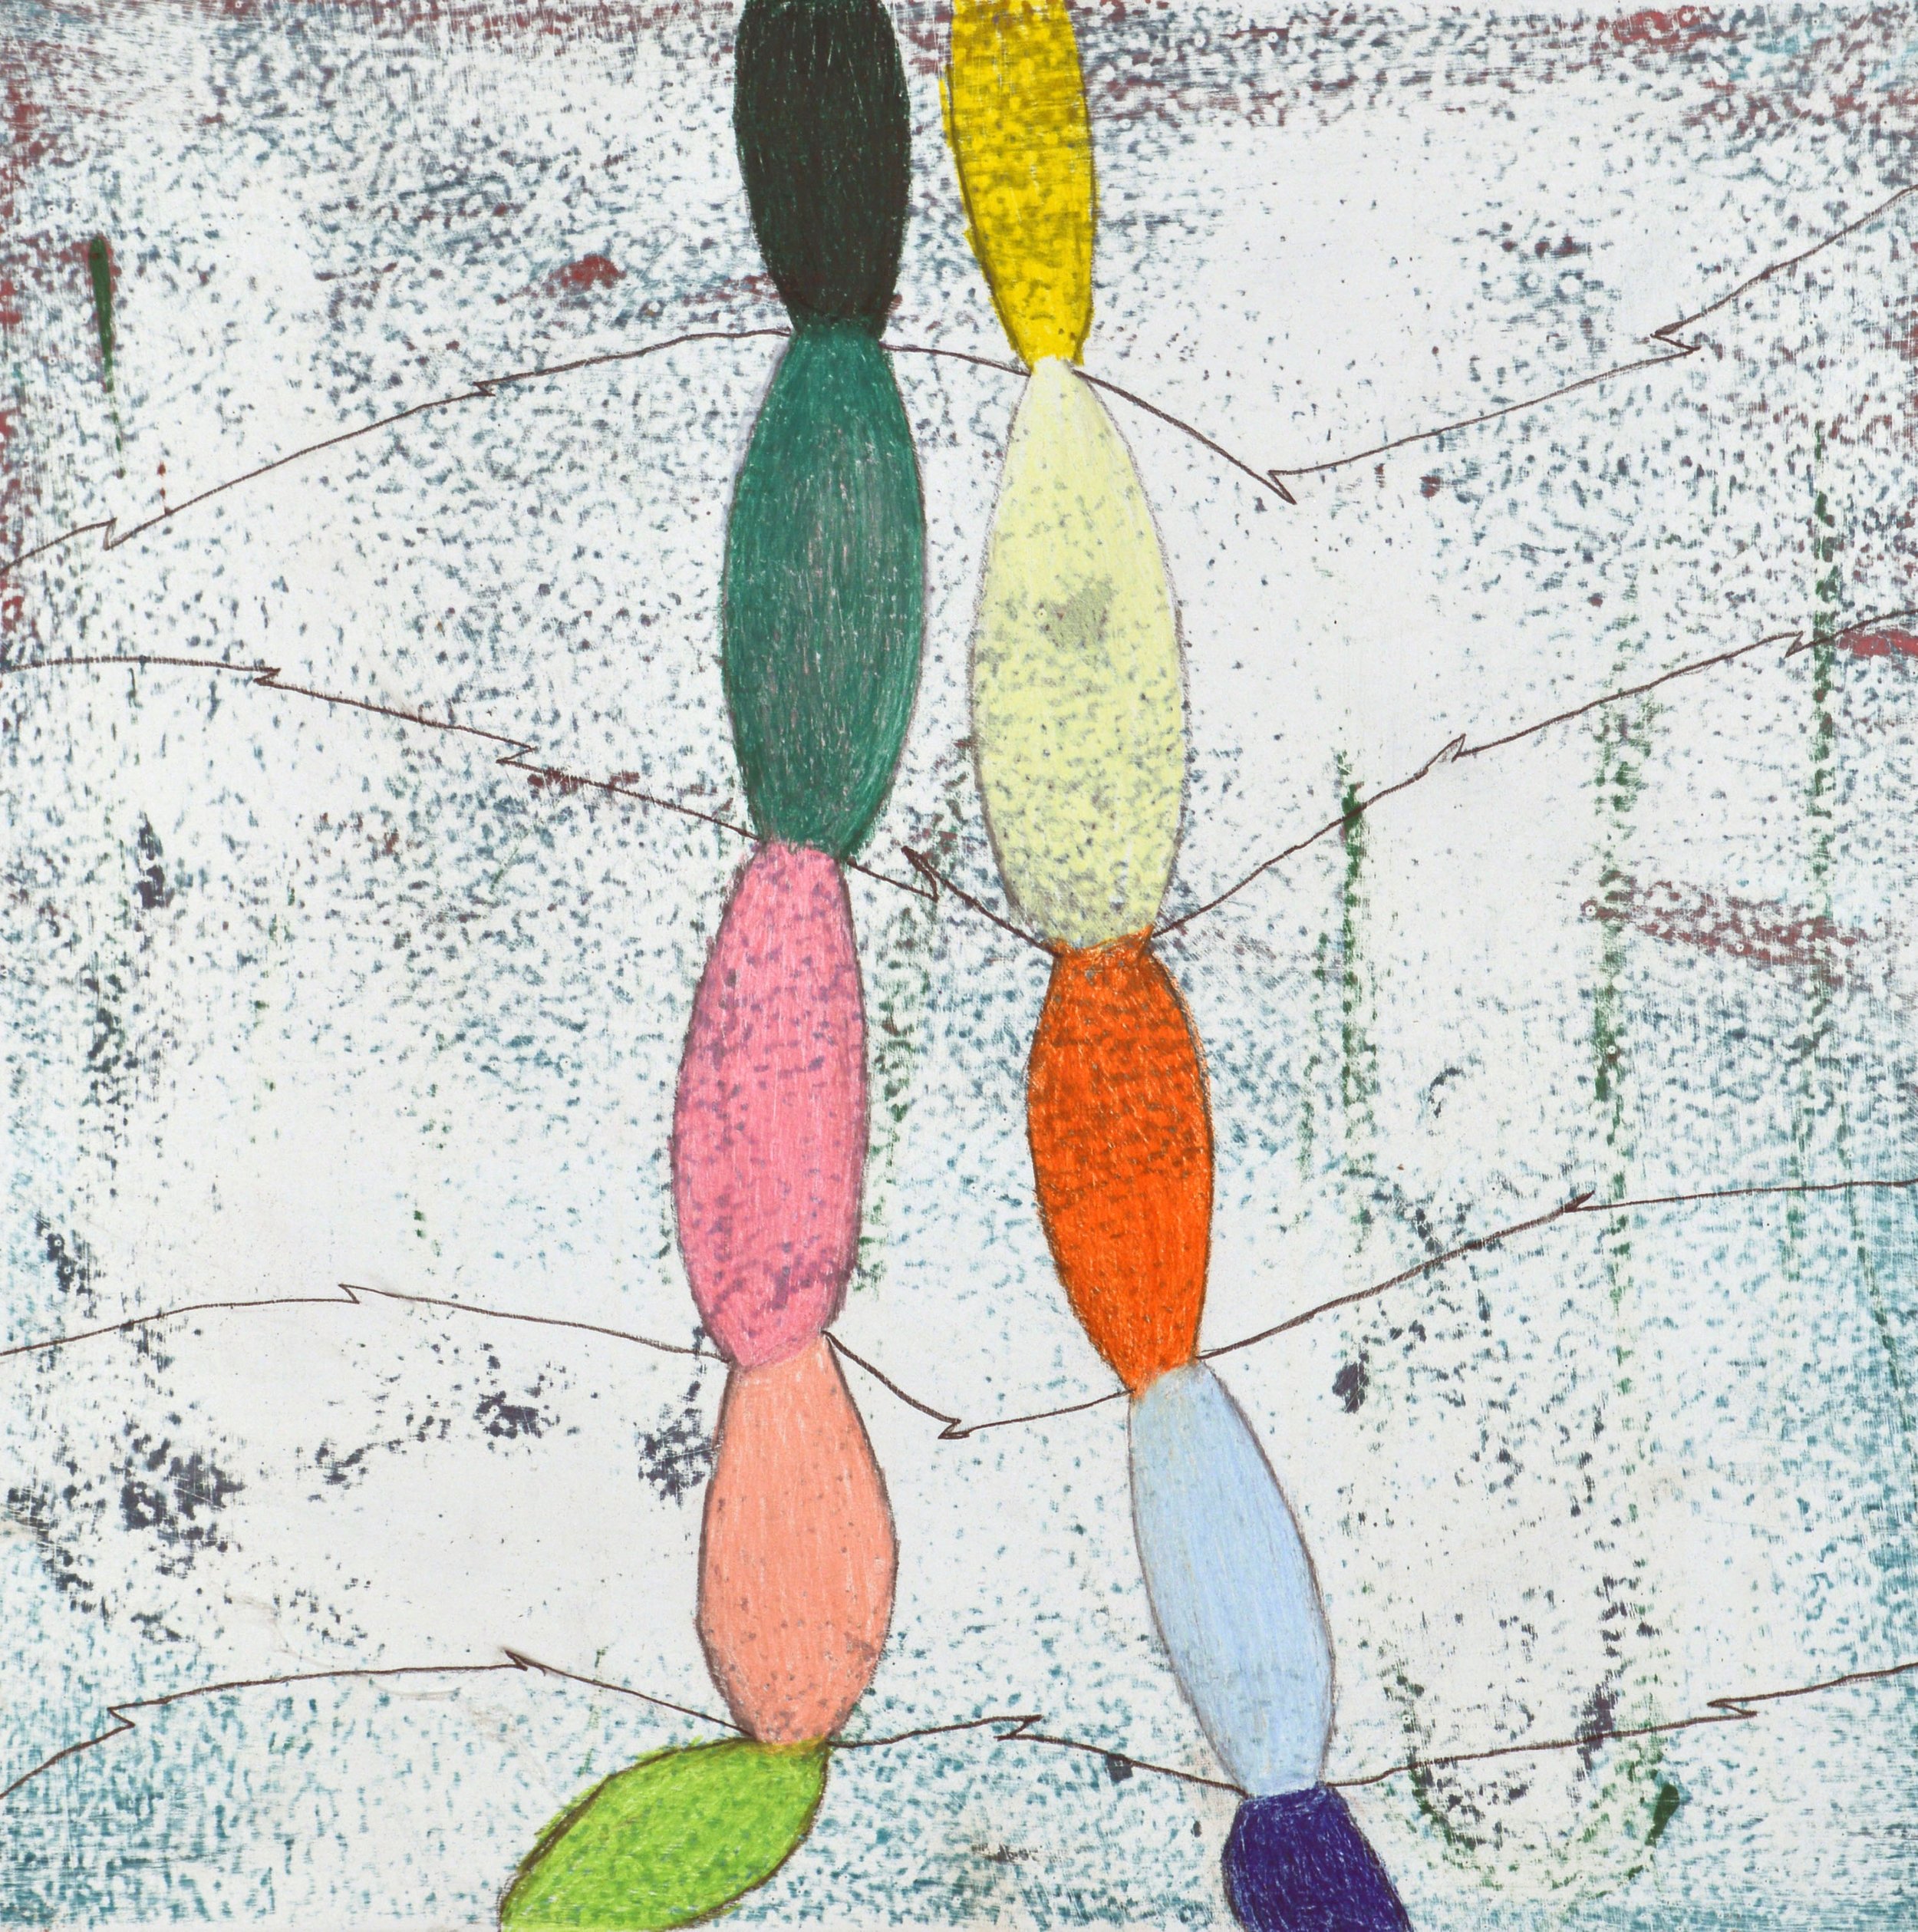  Chains, 2020  oil, pencil, and colored pencil on panel, 15 x 15 inches (38.1 x 38.1  cm) 